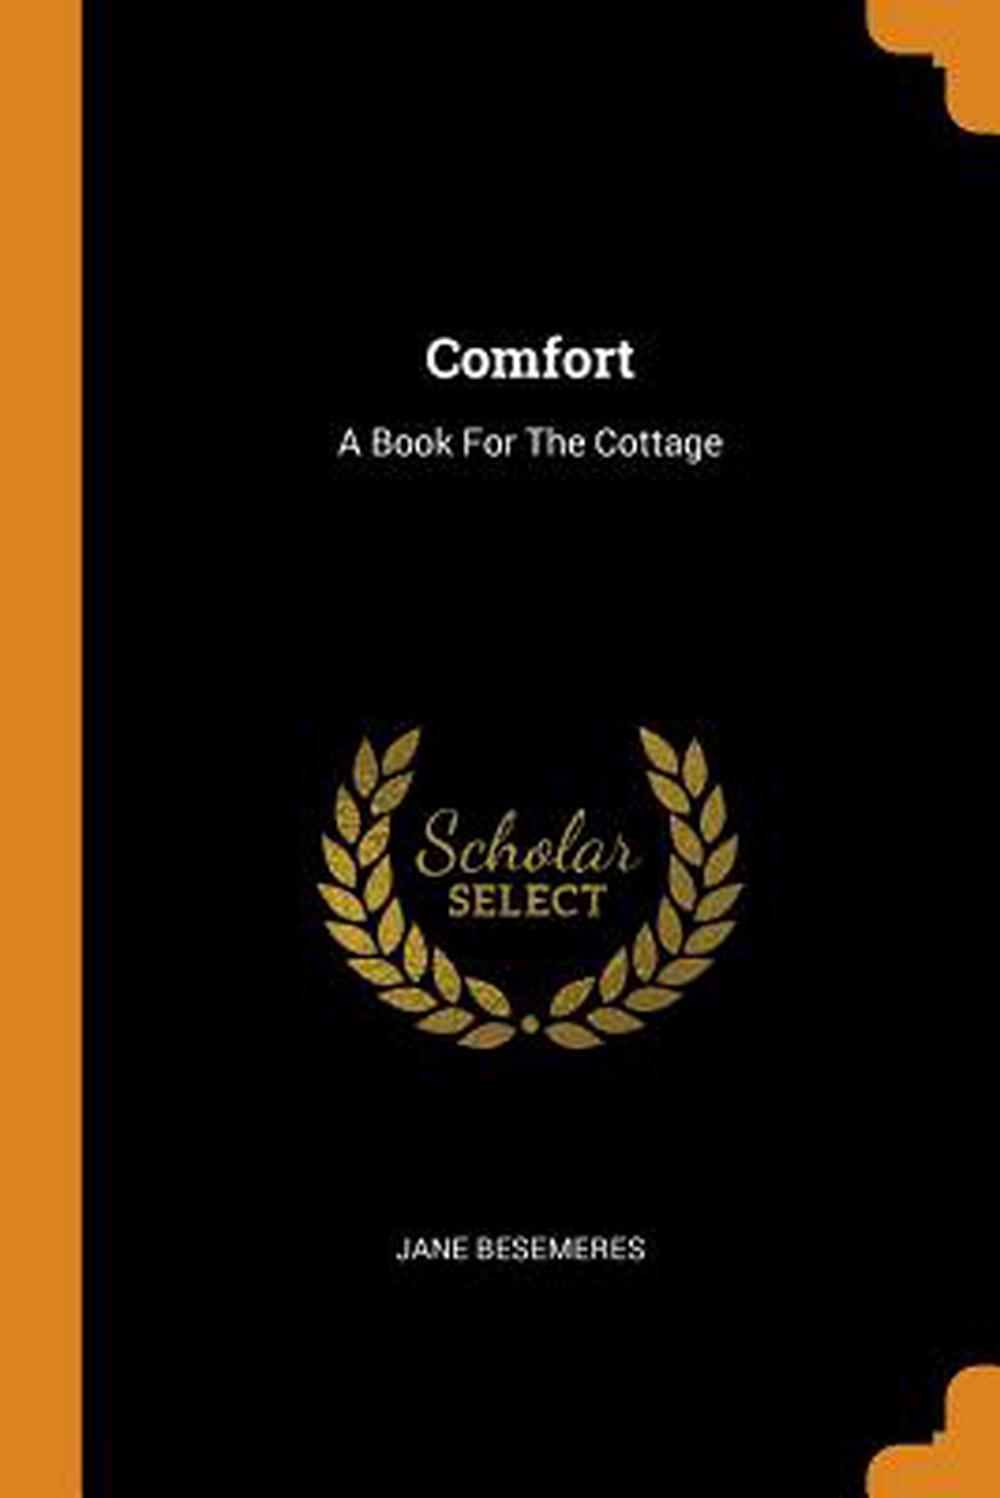 the comfort book book review